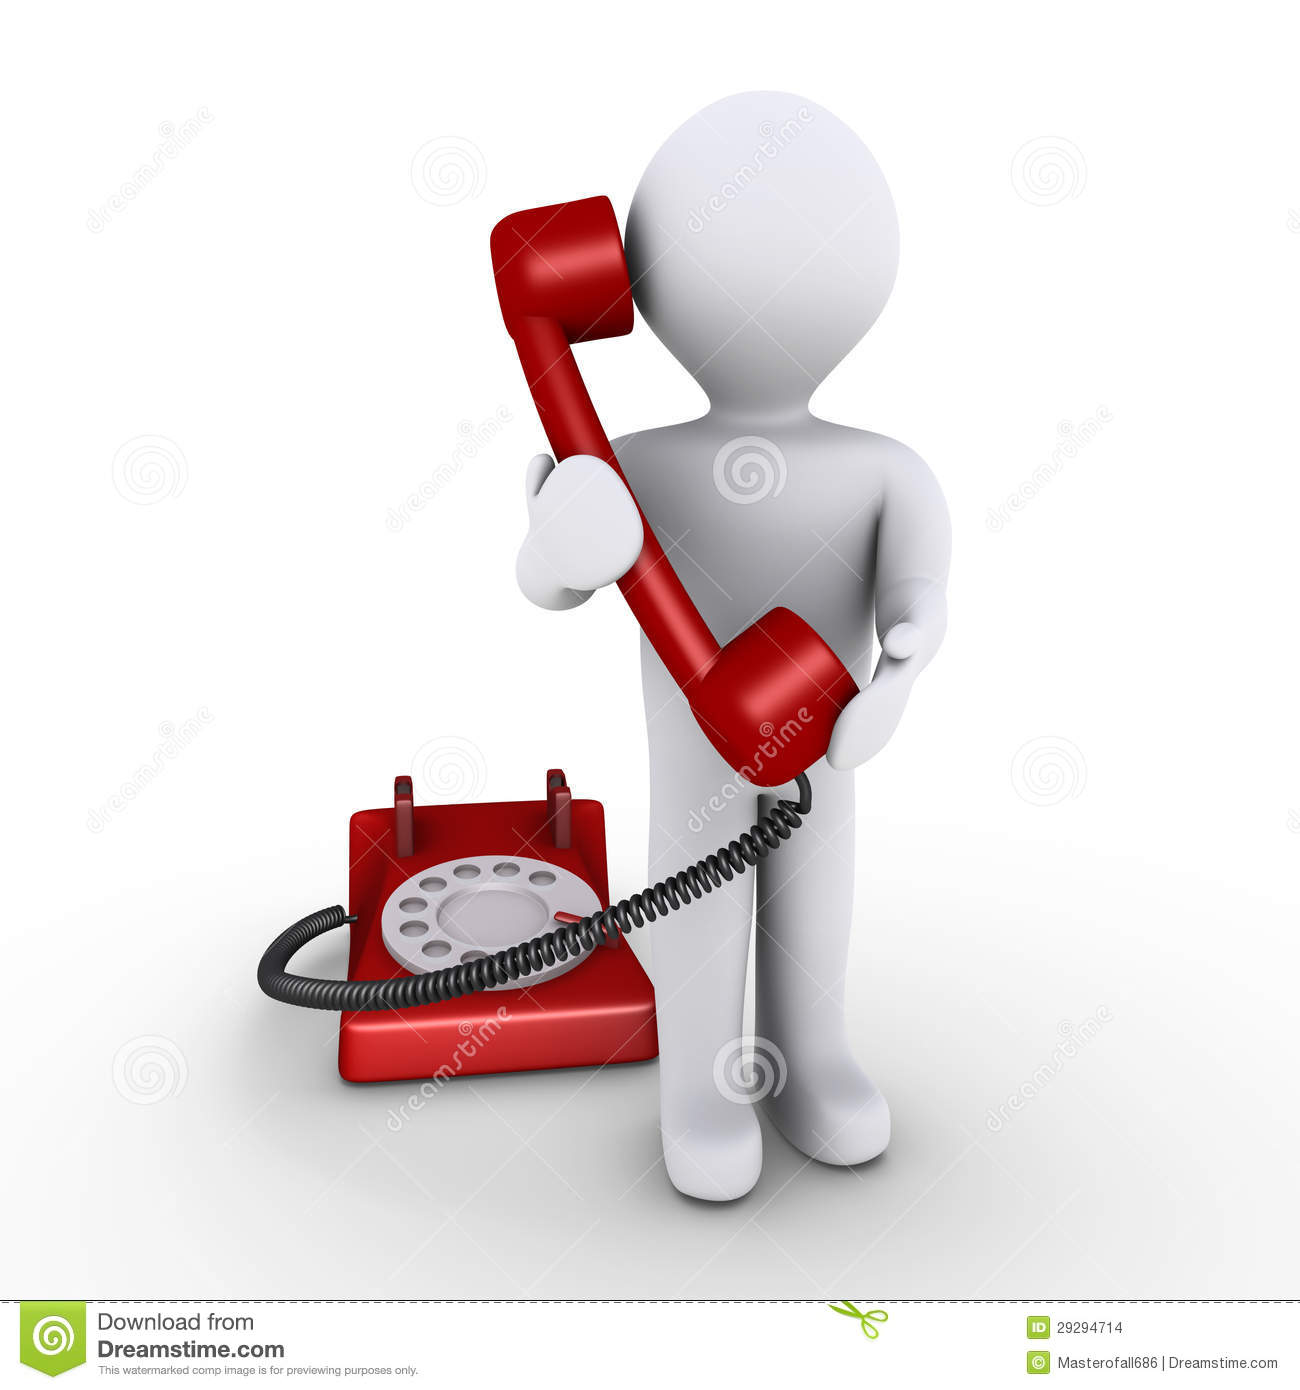 Person Is Holding Telephone Receiver Stock Images   Image  29294714